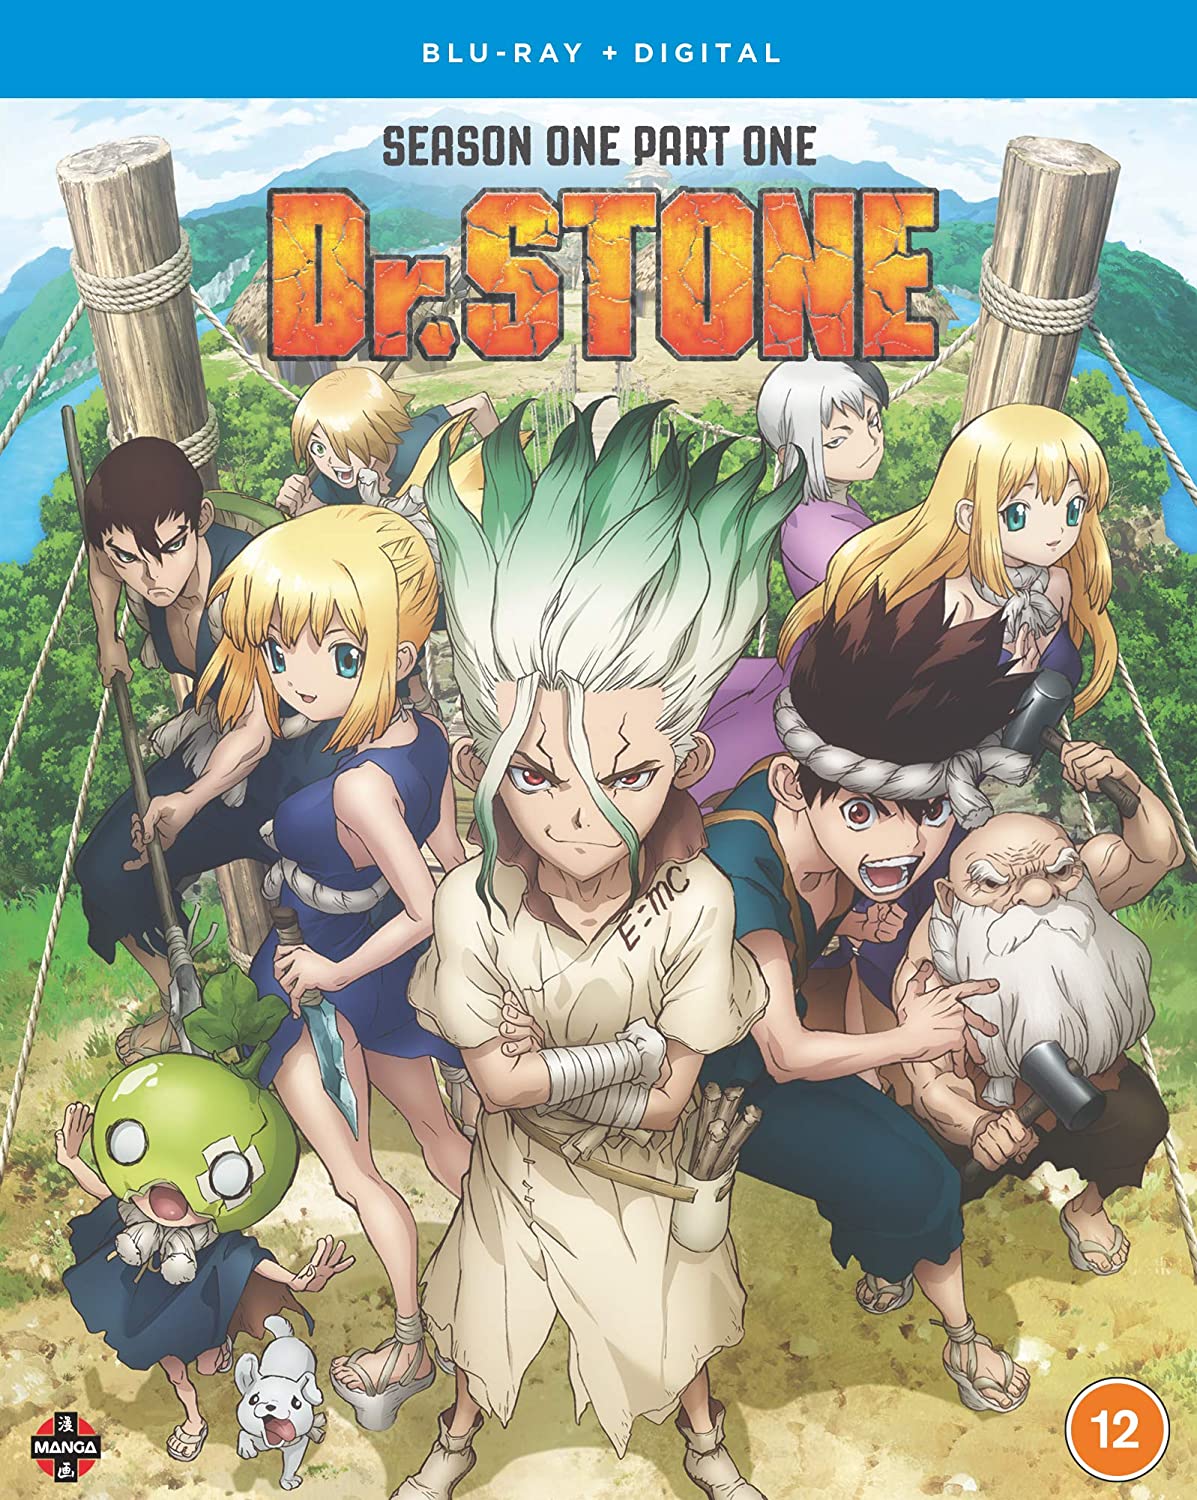 GUIDE: It's Time to Refresh Yourself on the Characters of Dr. STONE -  Crunchyroll News